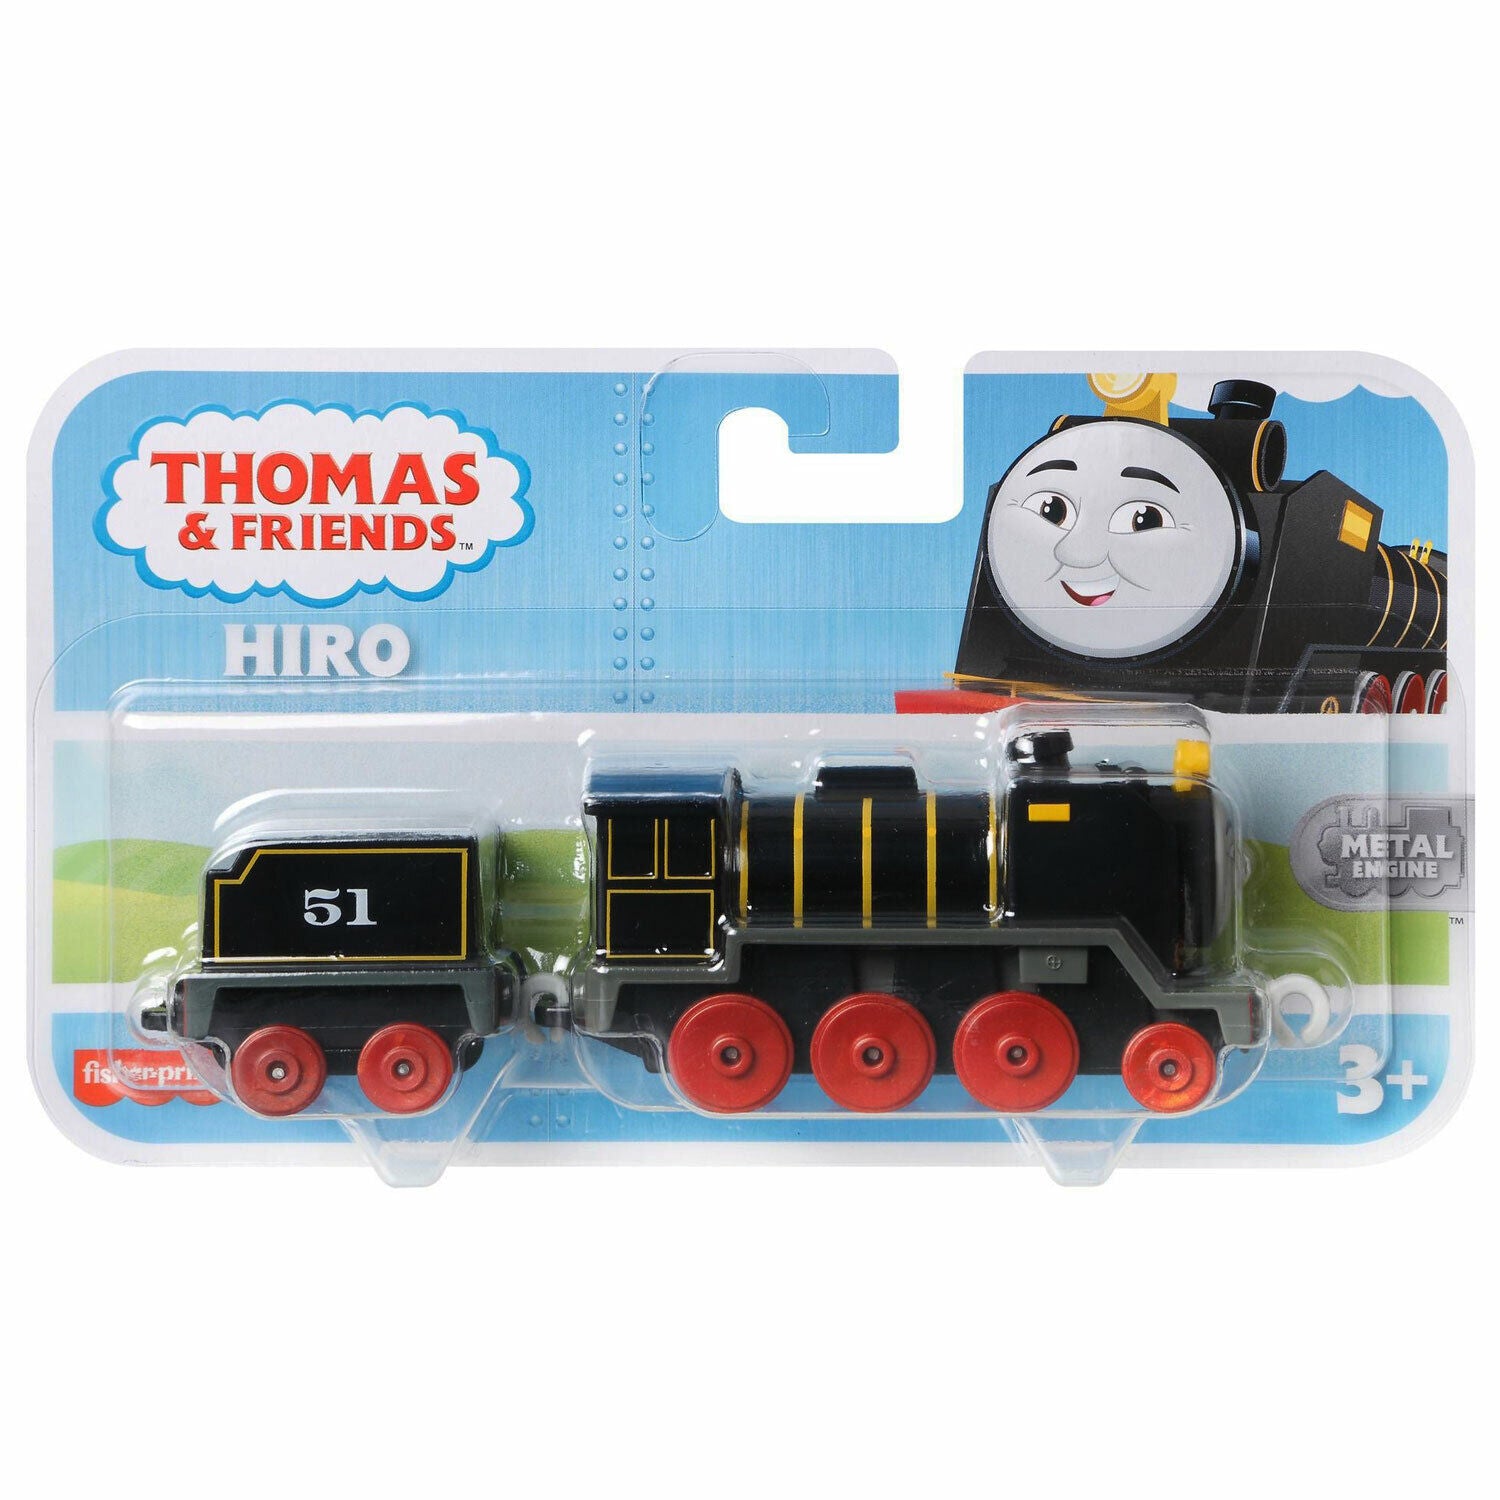 New Fisher-Price Thomas & Friends Hiro Metal Engine - Authentic Collectible